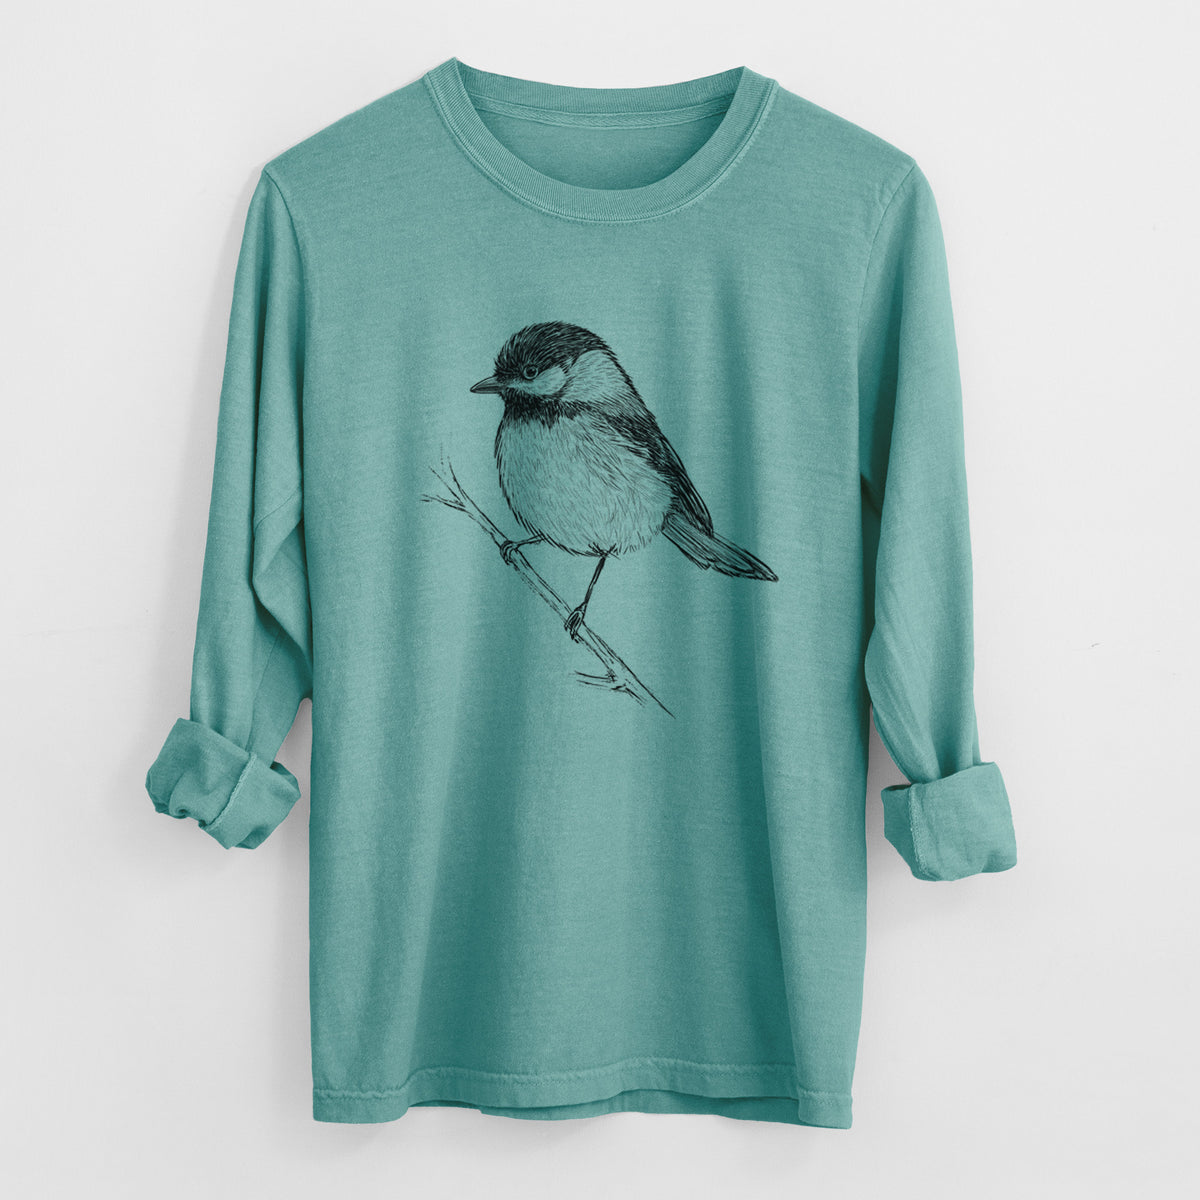 Black-capped Chickadee - Poecile atricapillus - Heavyweight 100% Cotton Long Sleeve